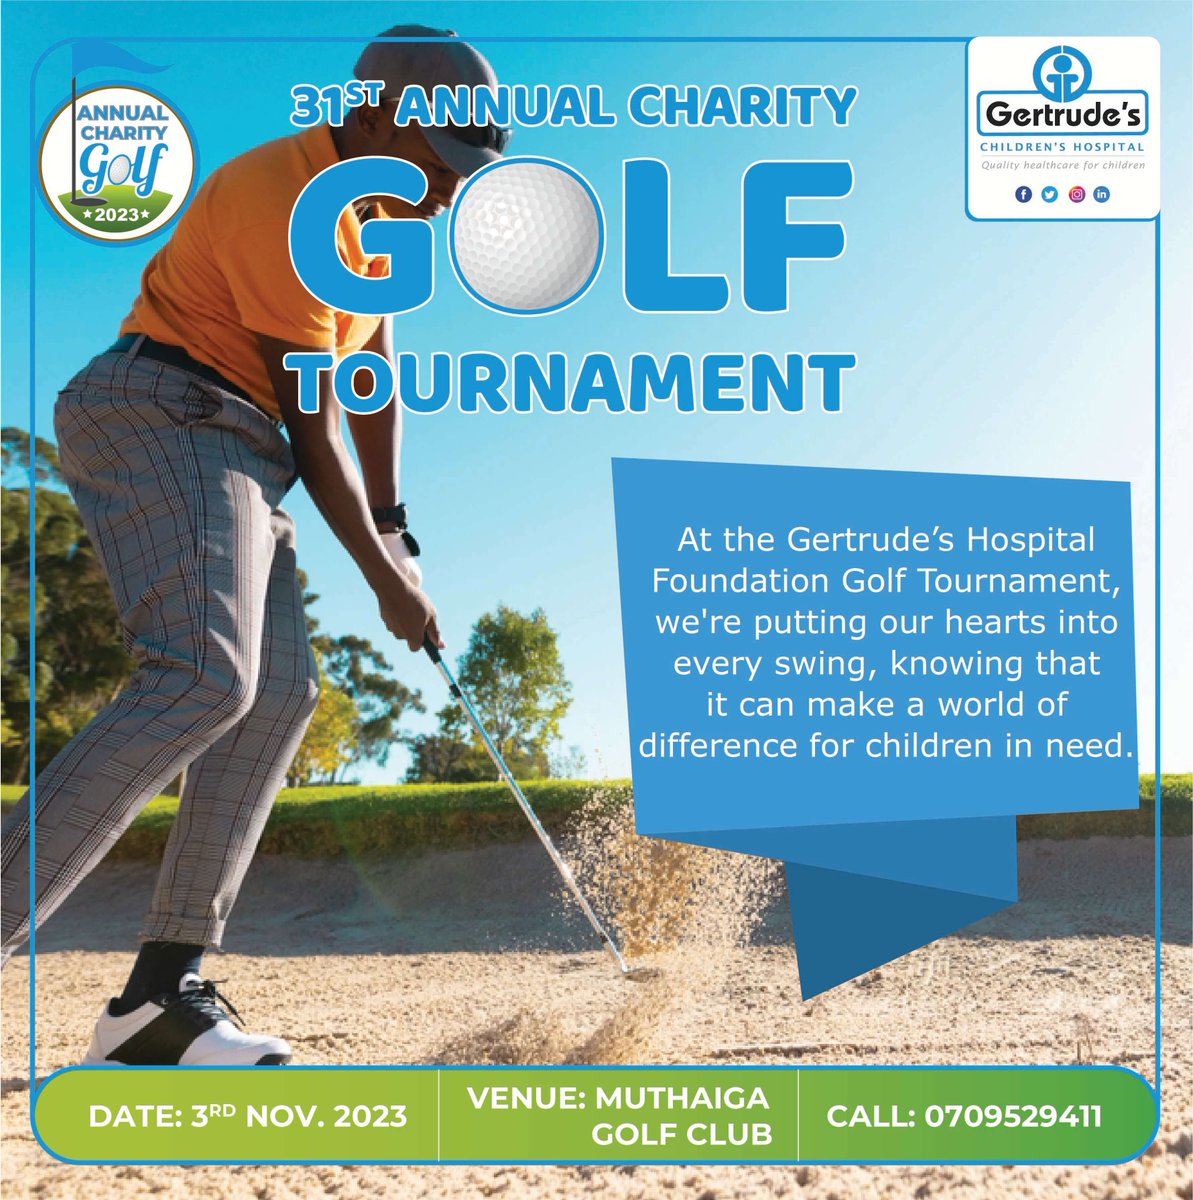 Every swing, putt, and moment on the course counts in fighting childhood cancer. Join us on November 3rd to be a part of this heartwarming journey. 💛🏌️‍♀️ #GertrudesGolfTournament2023 #GertrudesKe #UlizaDaktari